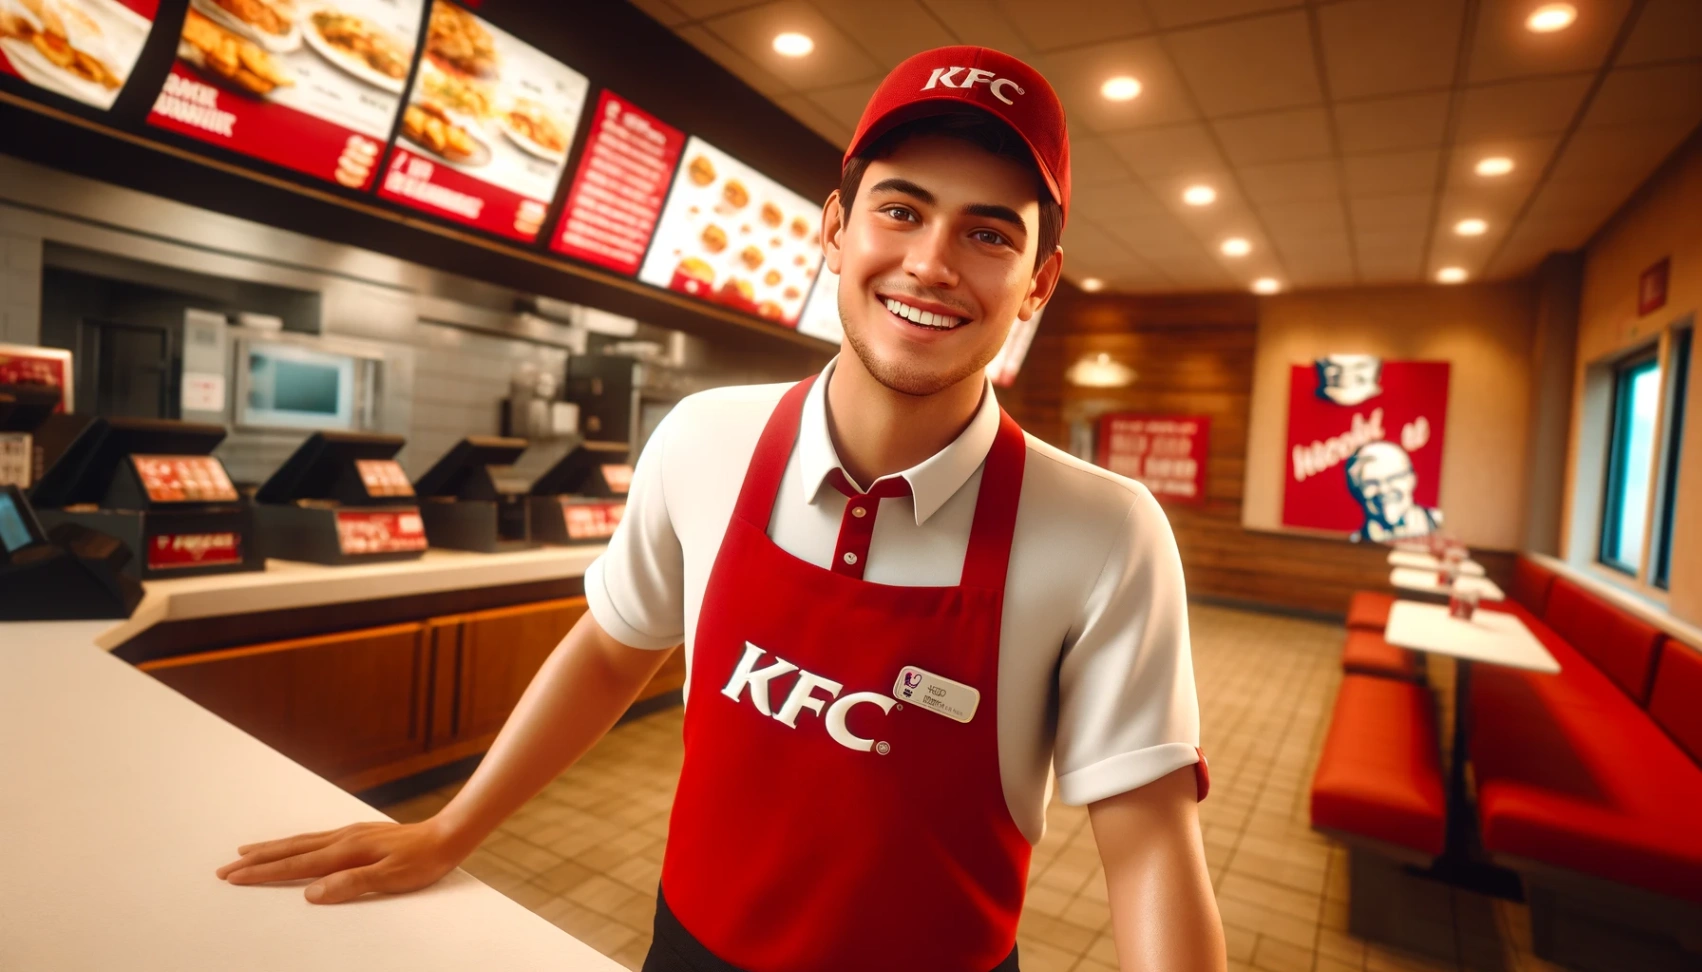 KFC - Learn How to Apply for Vacancies